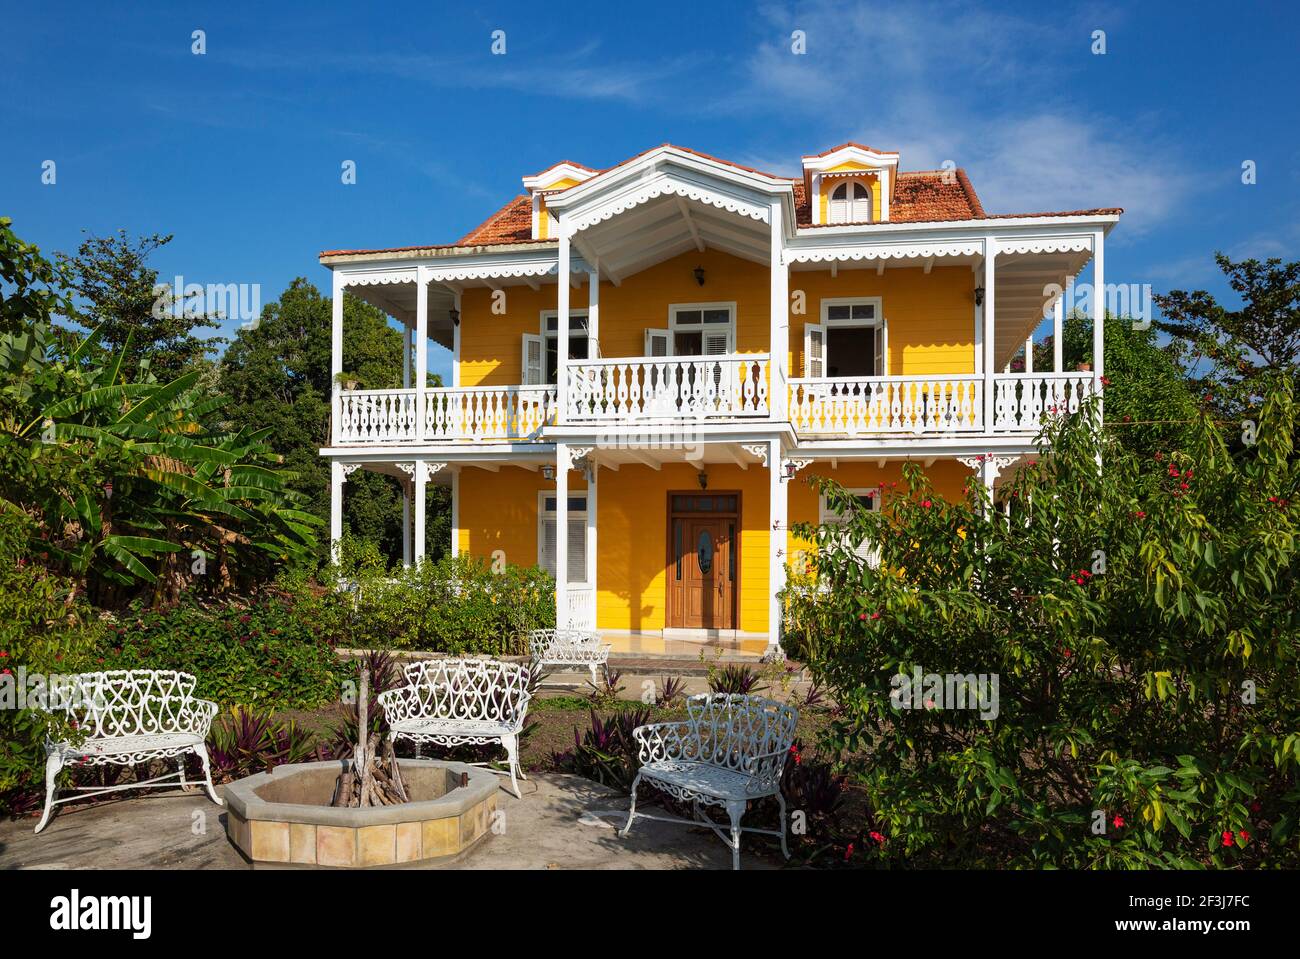 Well preserved colonial building that offers rooms for rent, Cienfuegos, Cuba Stock Photo